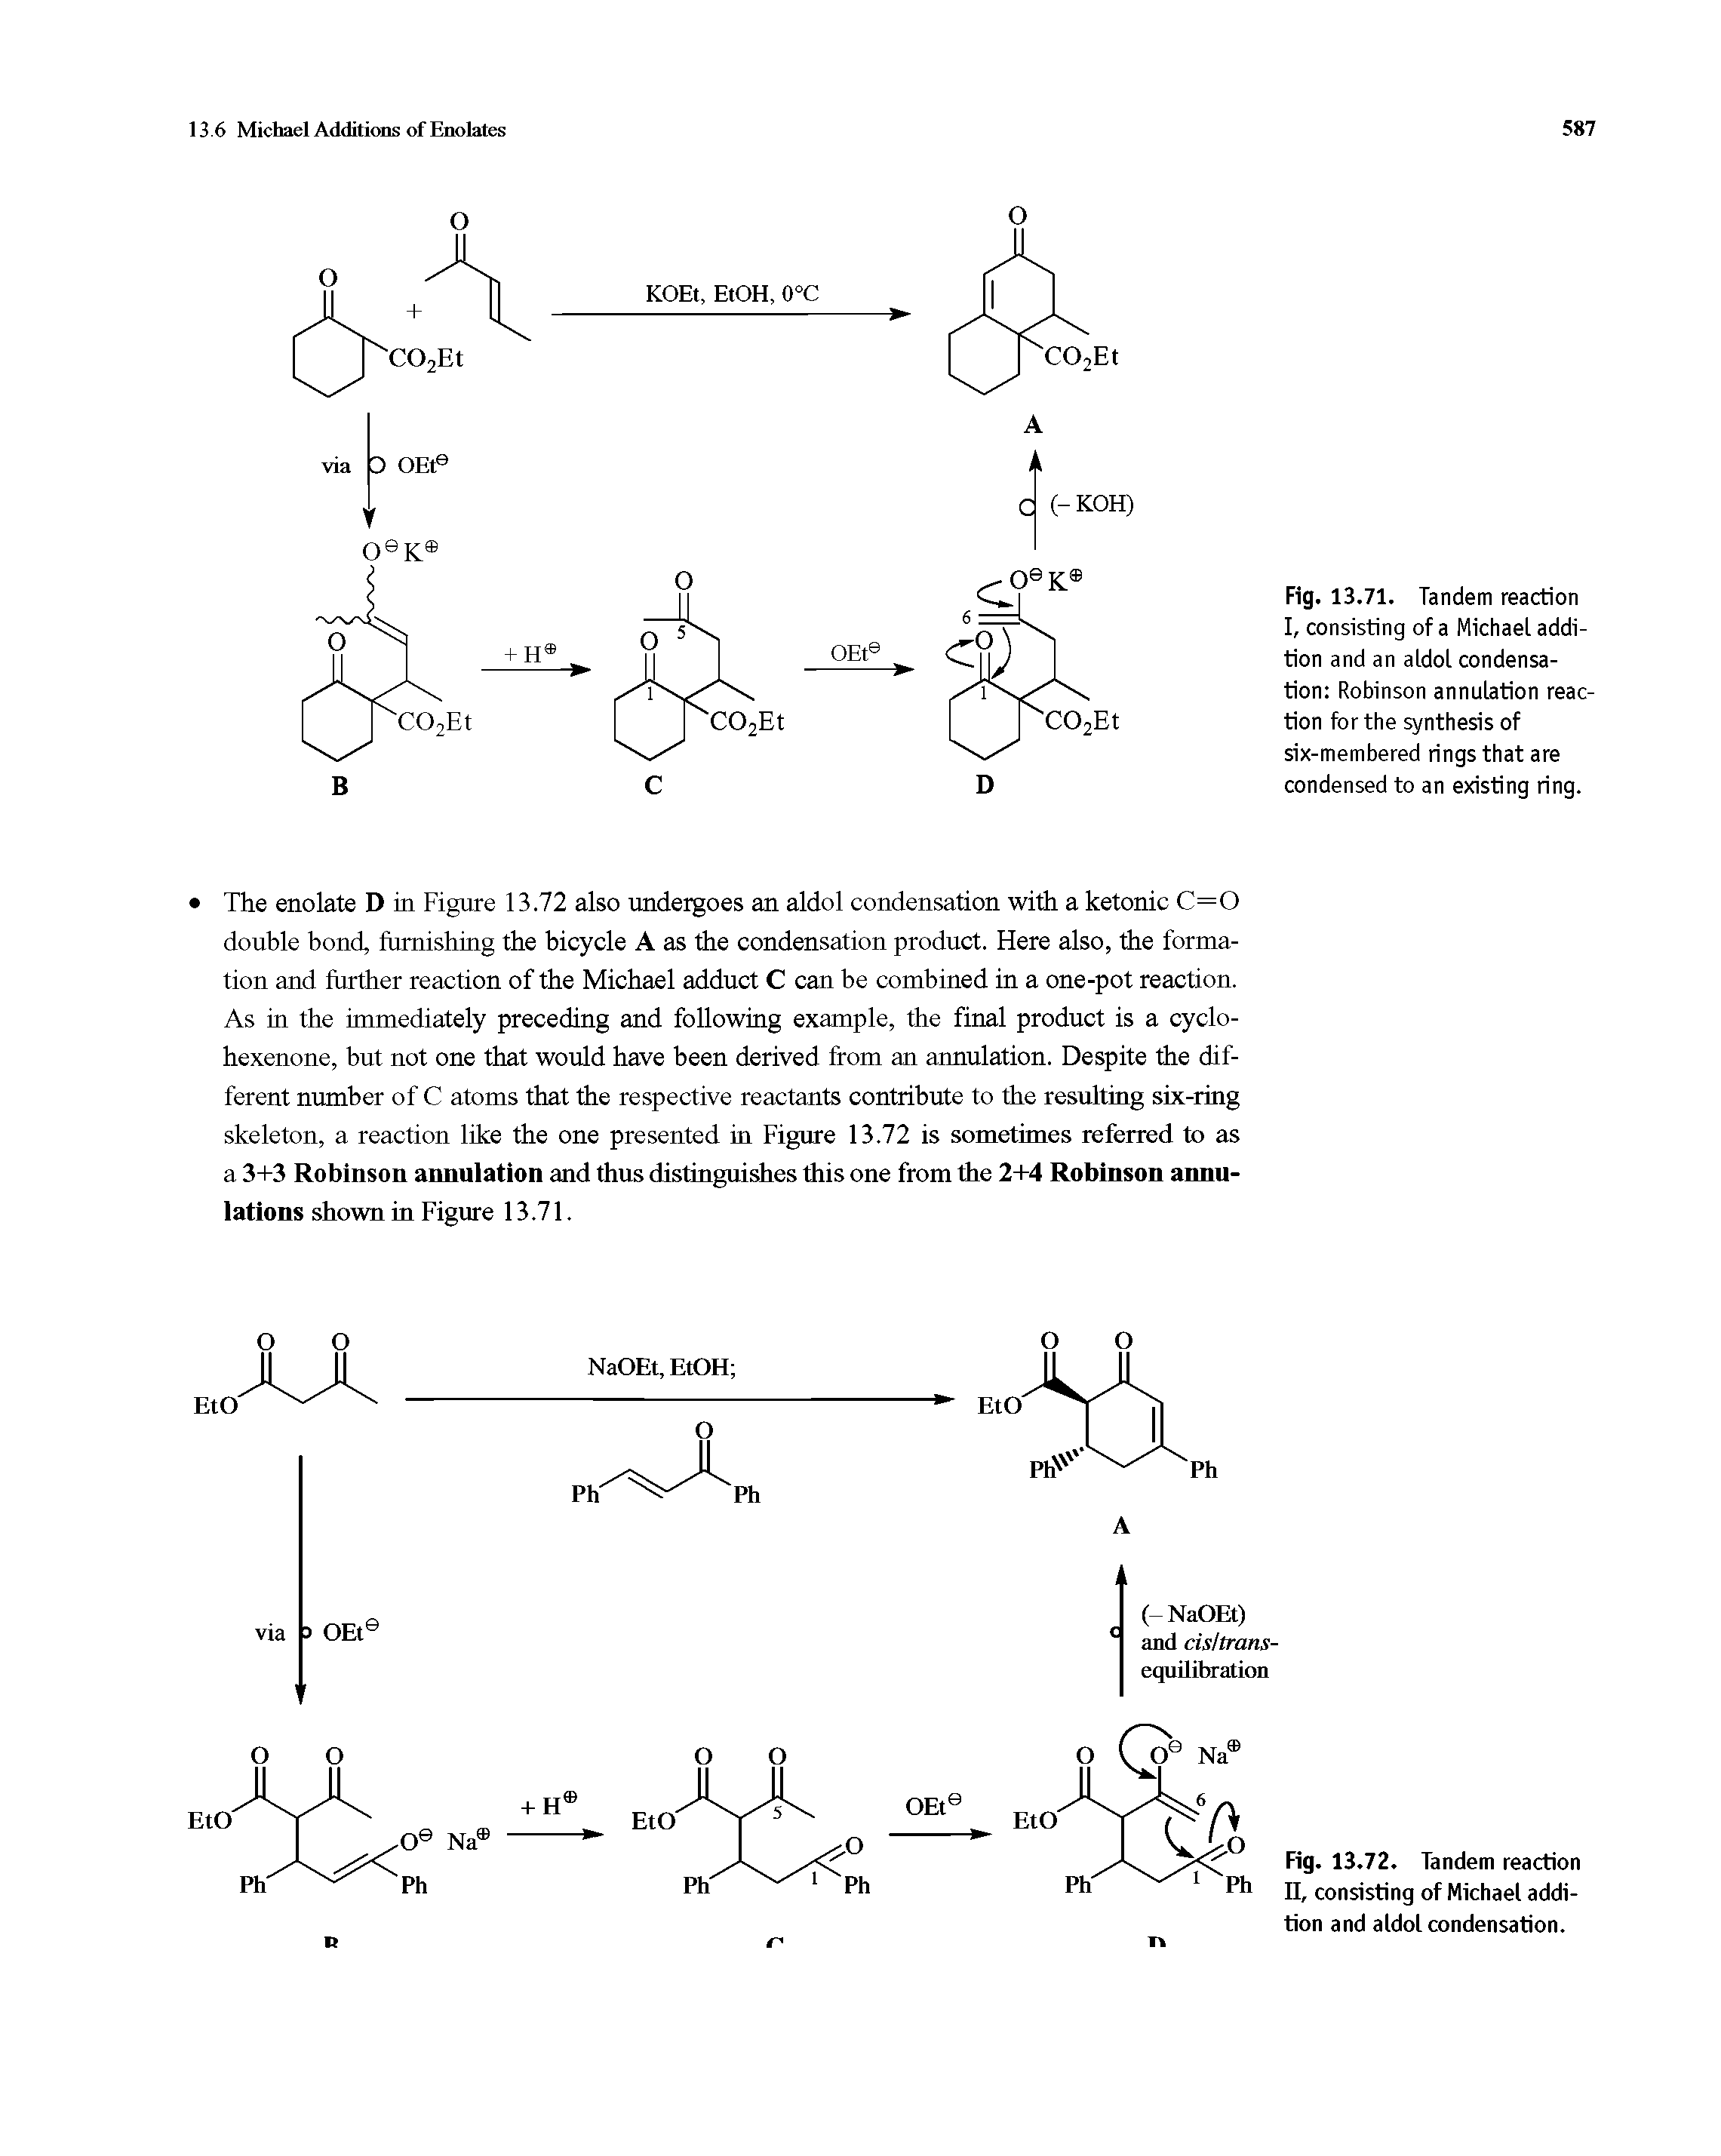 Fig. 13.71. Tandem reaction I, consisting of a Michael addition and an aldol condensation Robinson annulation reaction for the synthesis of six-membered rings that are condensed to an existing ring.